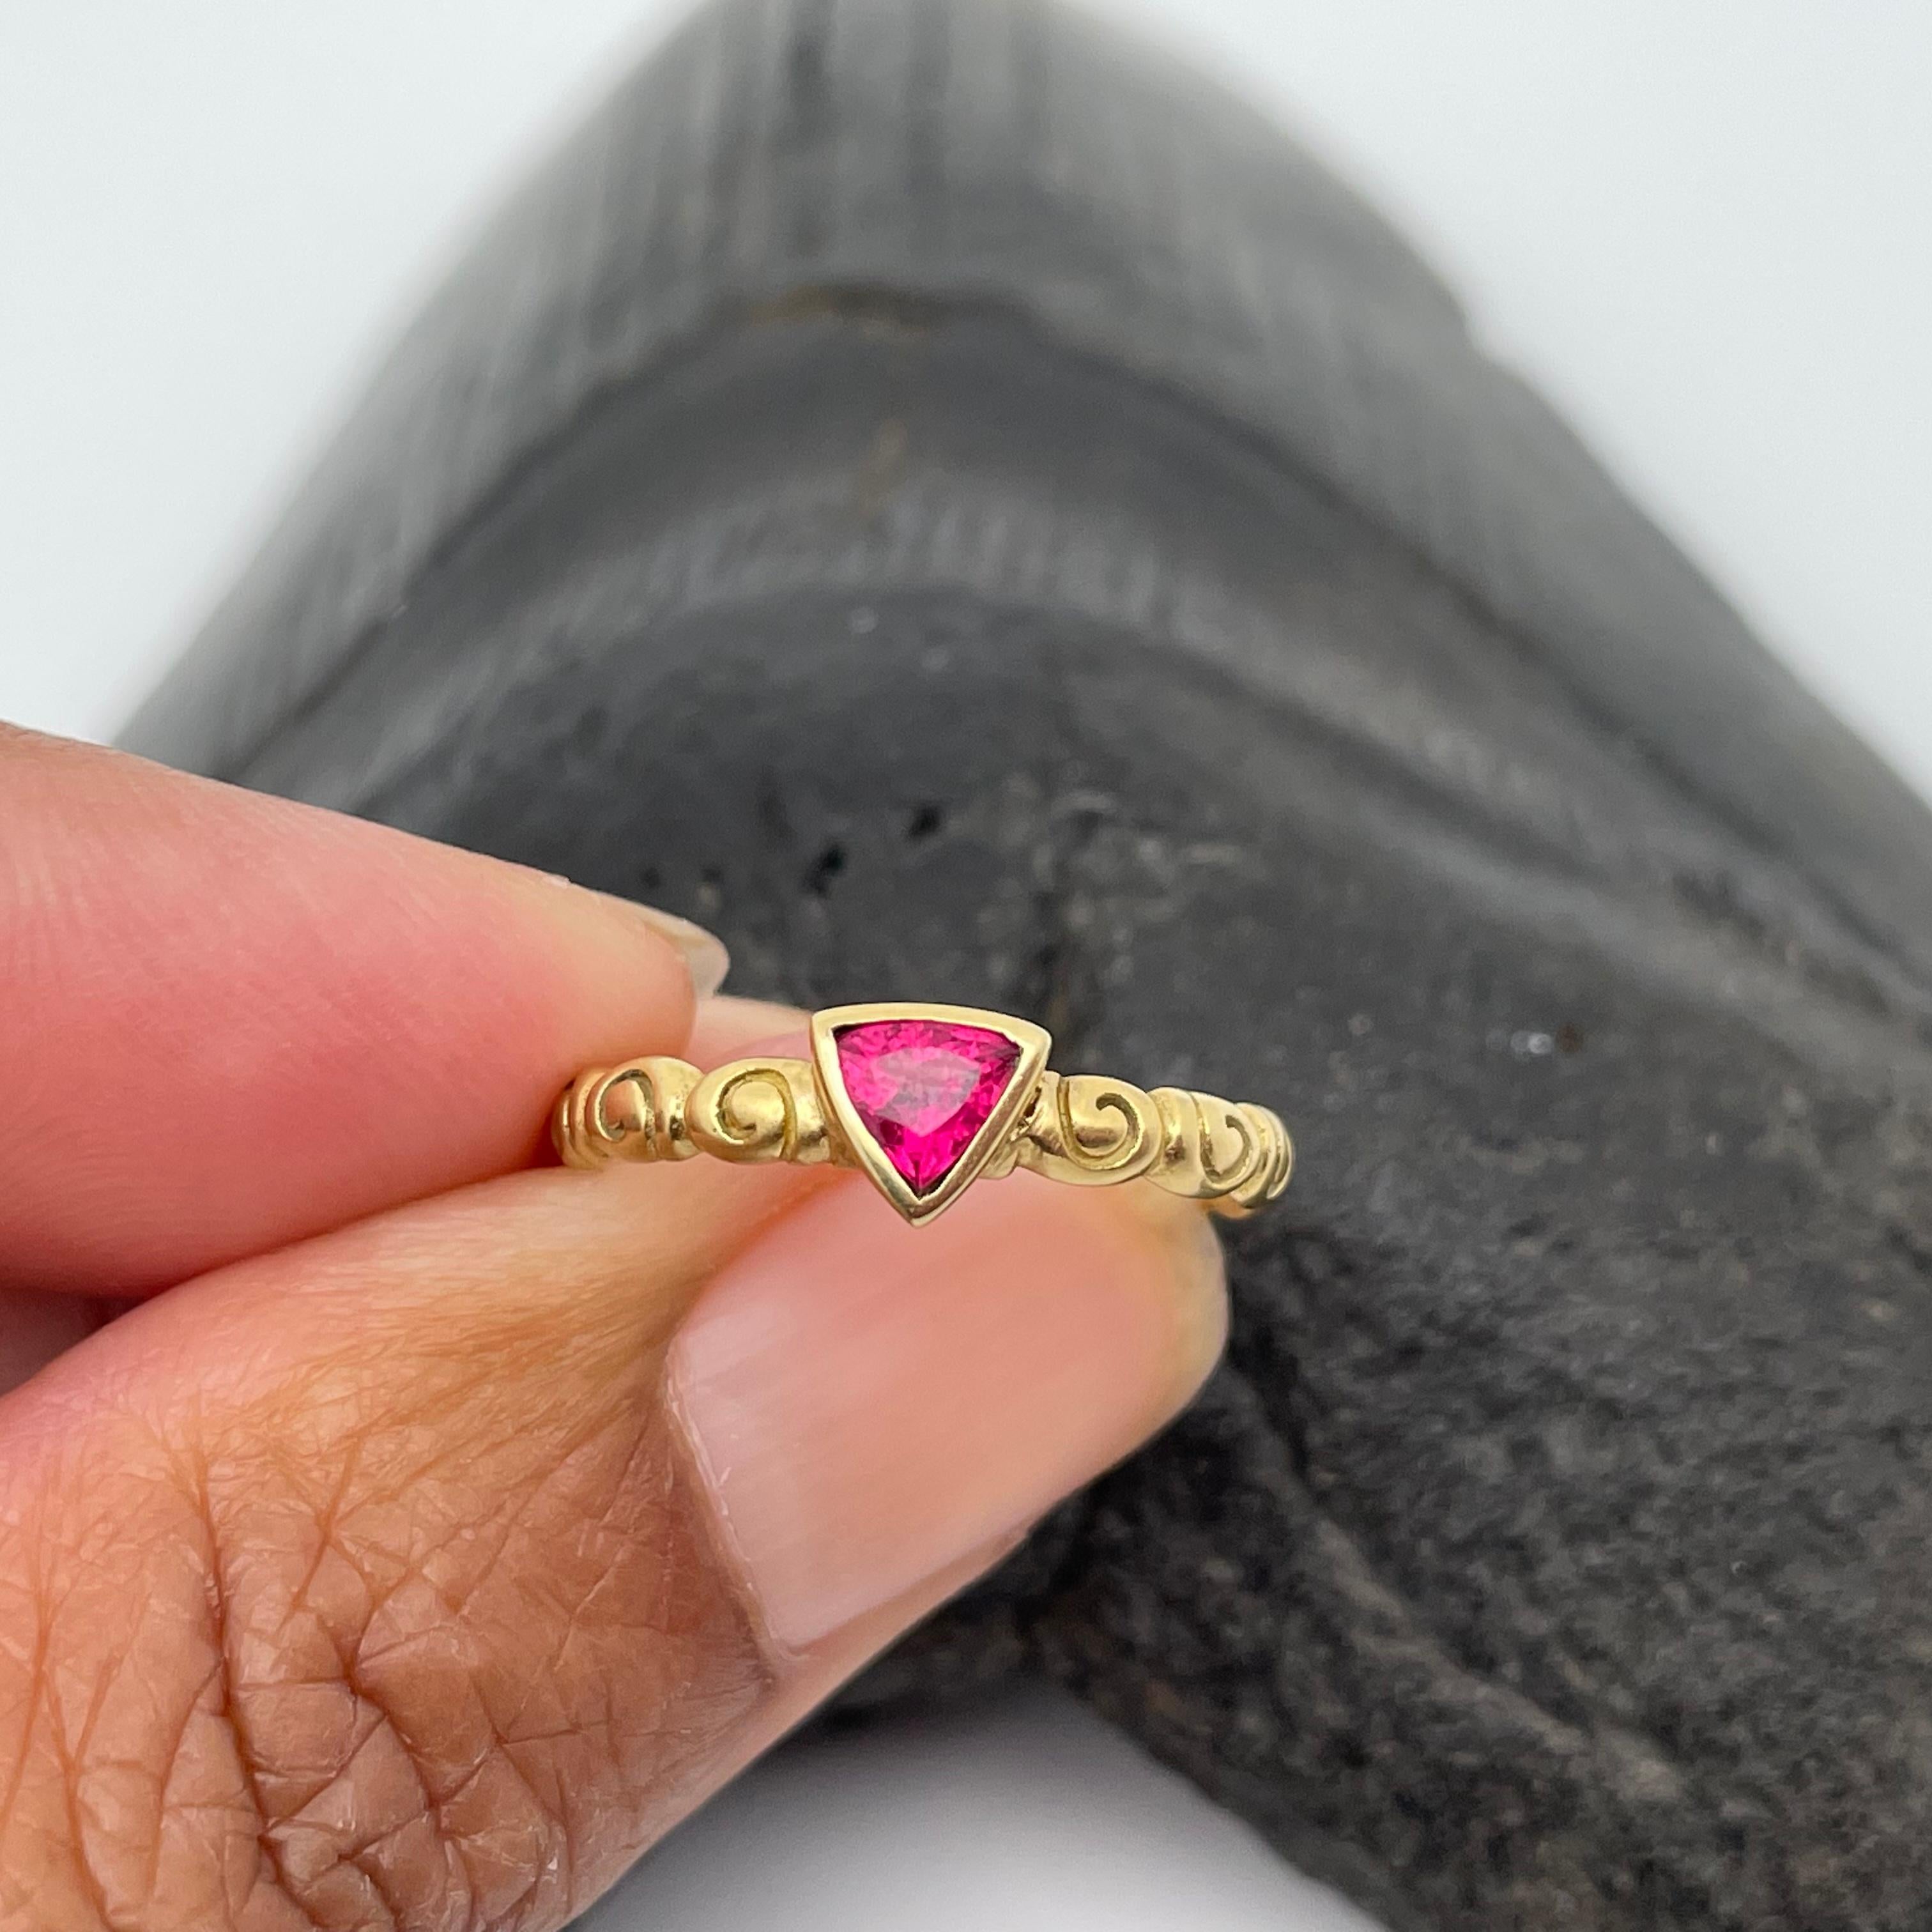 A brilliant 4 mm trillium faceted rubelite pink tourmaline rests in the center of gentle matte-finish spirals in this elegant design.  This ring is sized 6.
It is easily resizable.  Yummy!
